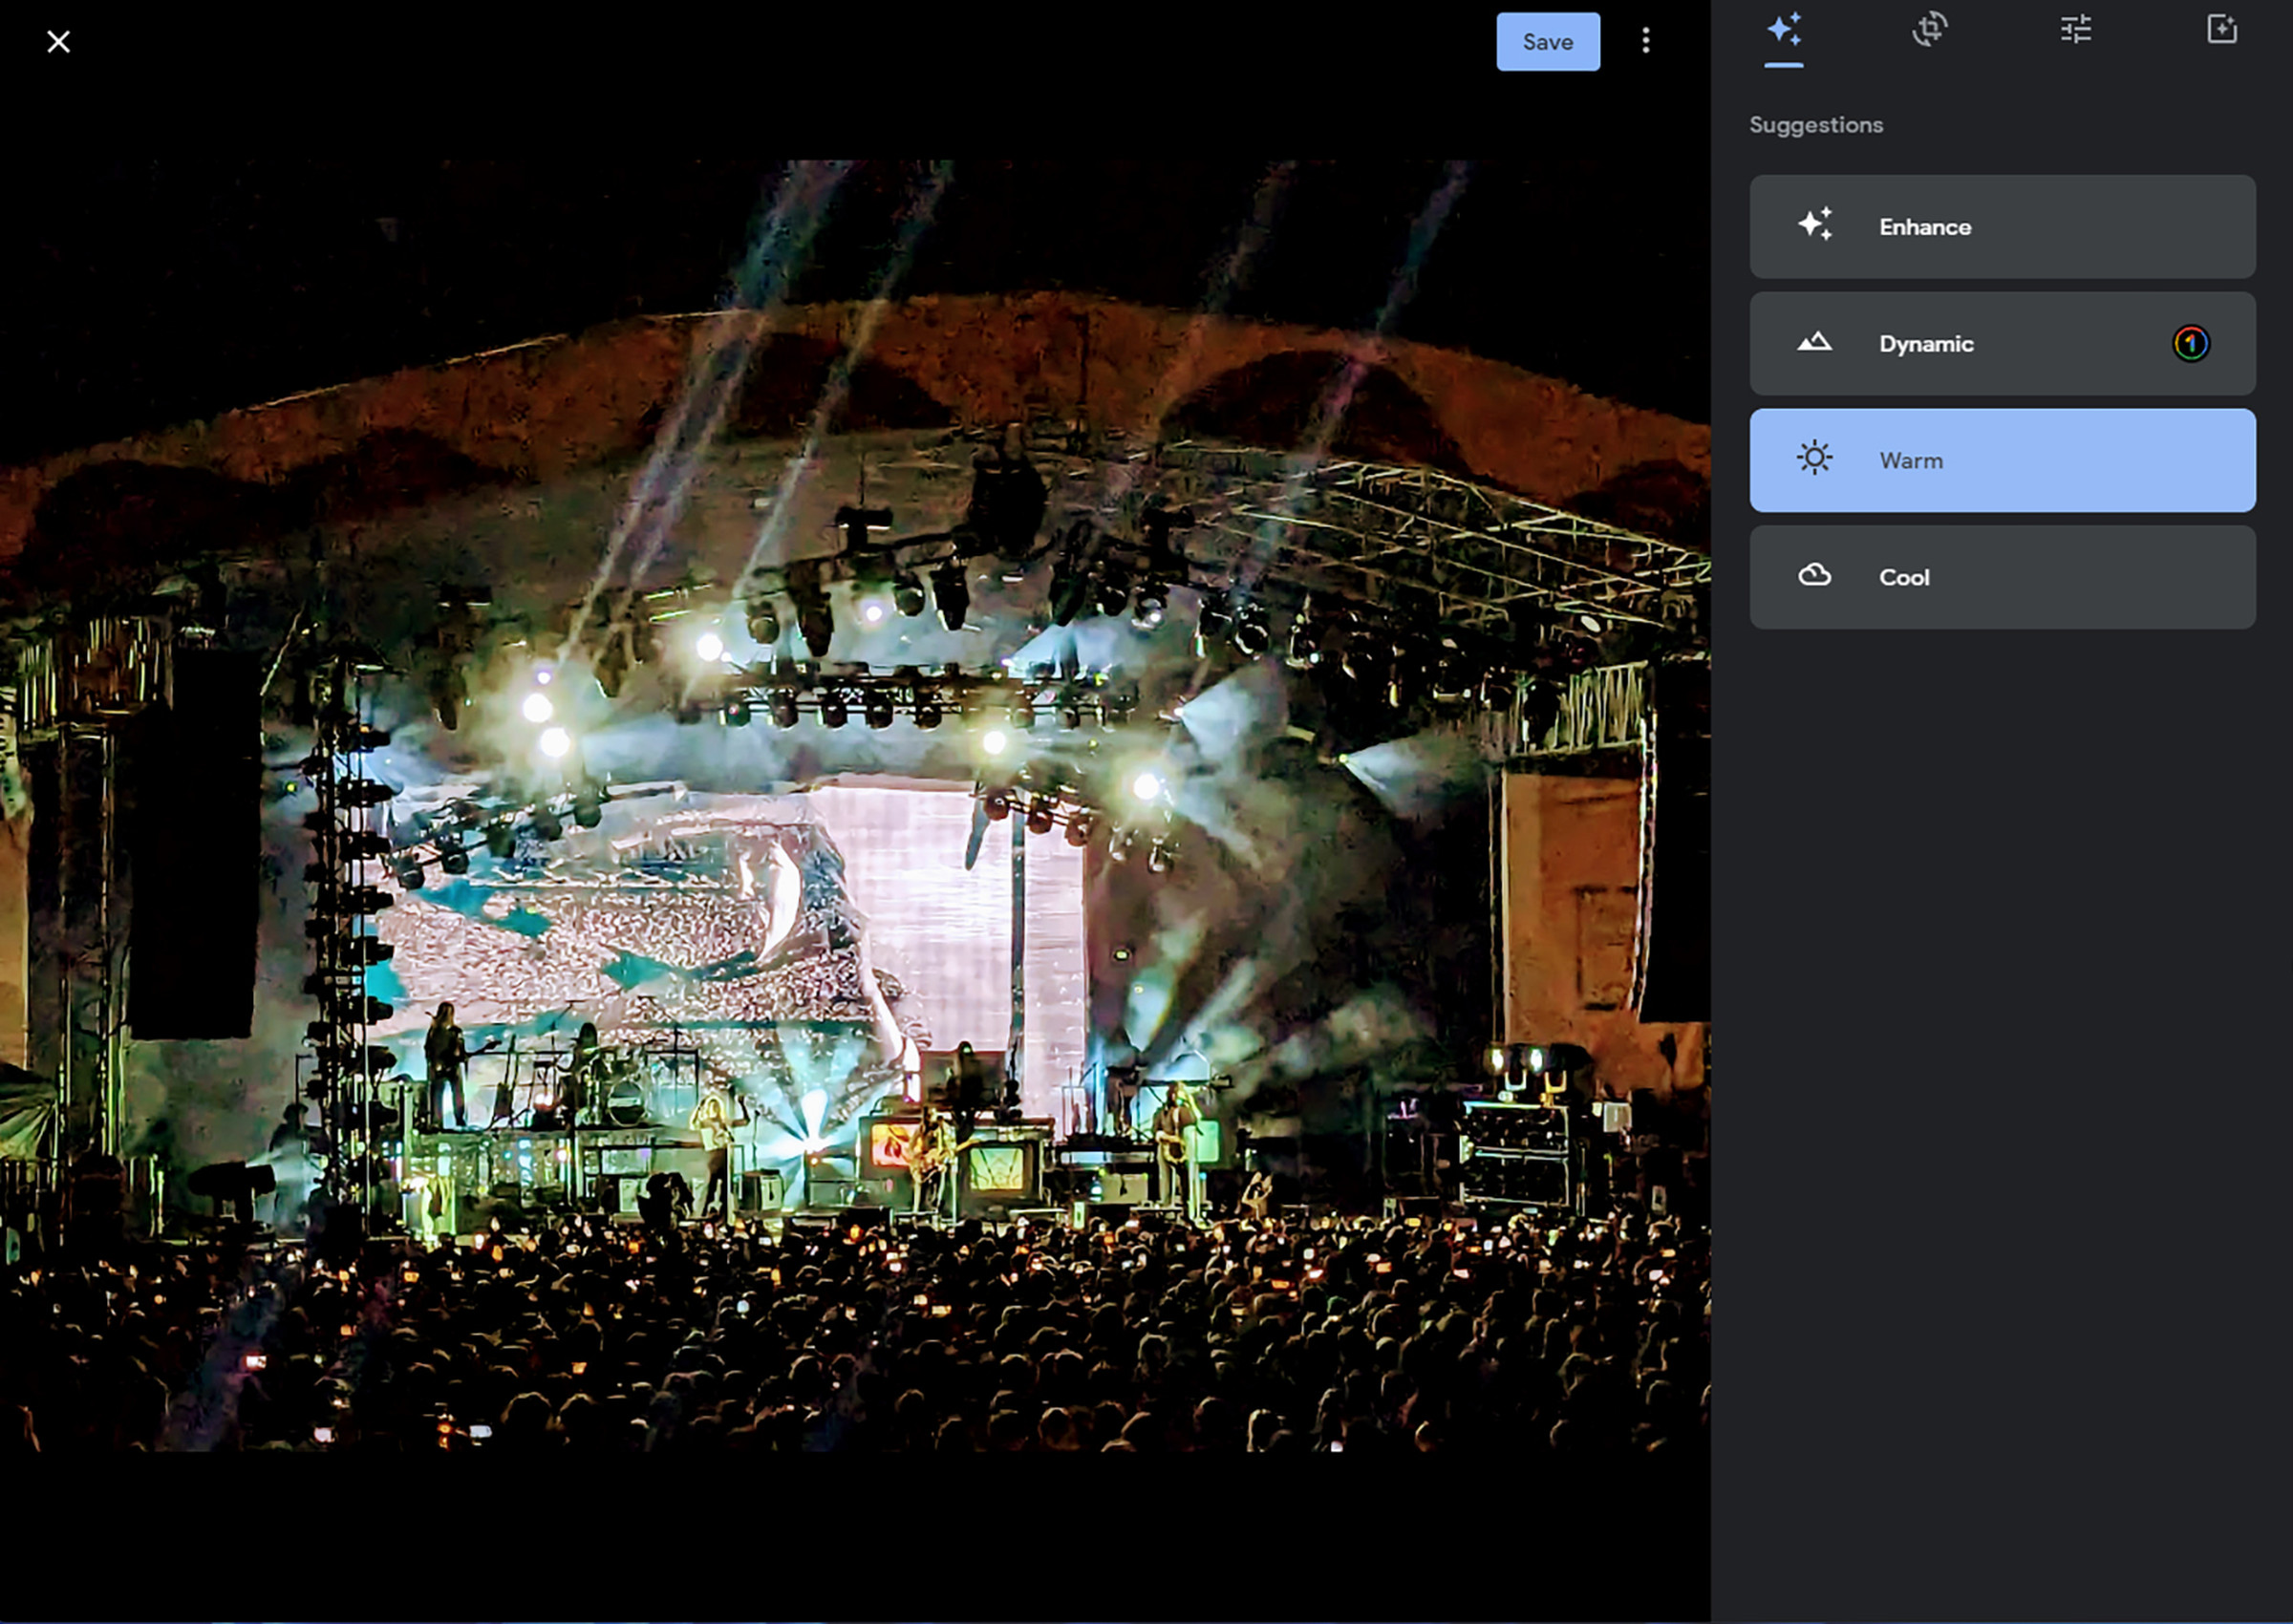 Photo of stage lit at night with column at right labeled Suggestions and several choices beneath, the one called Warm is highlighted.